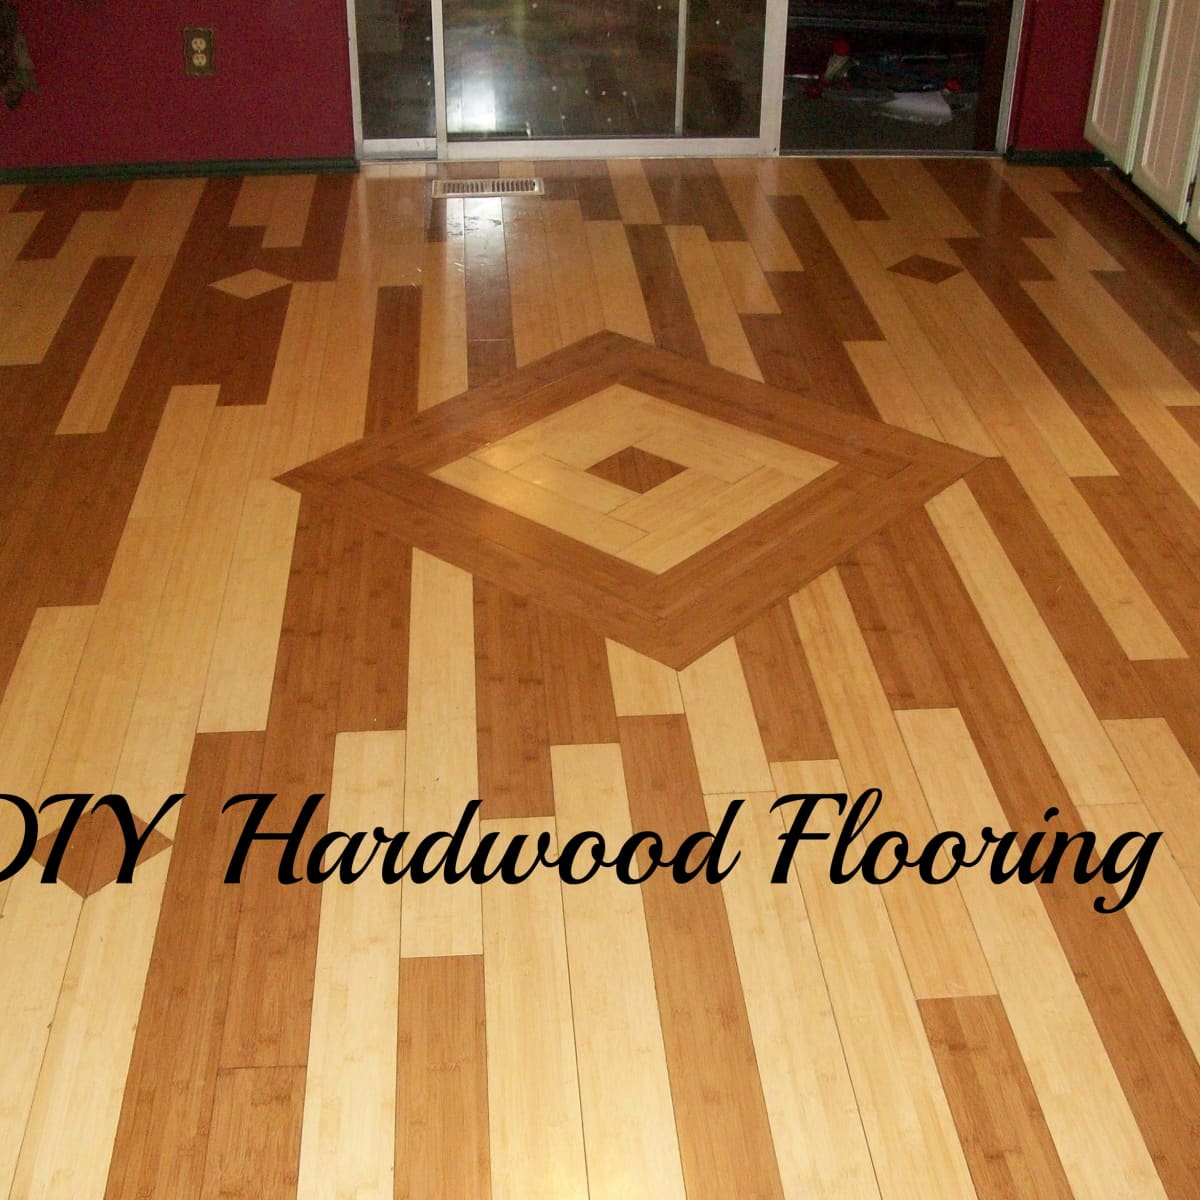 Non Engineered Wood Flooring, What Do You Need To Install Hardwood Floors